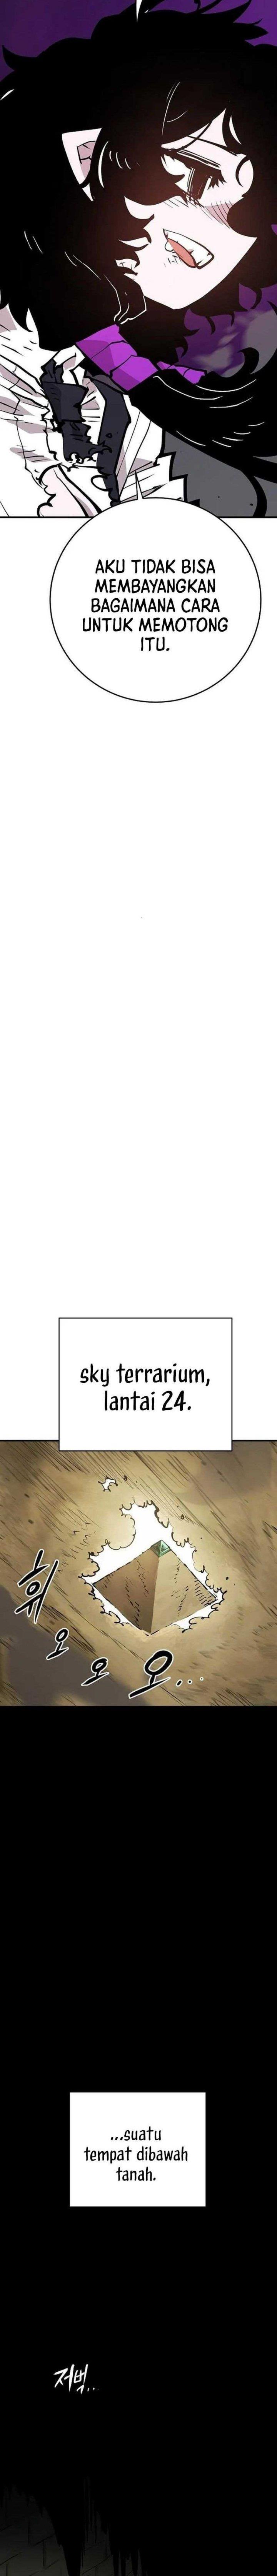 Player Chapter 138